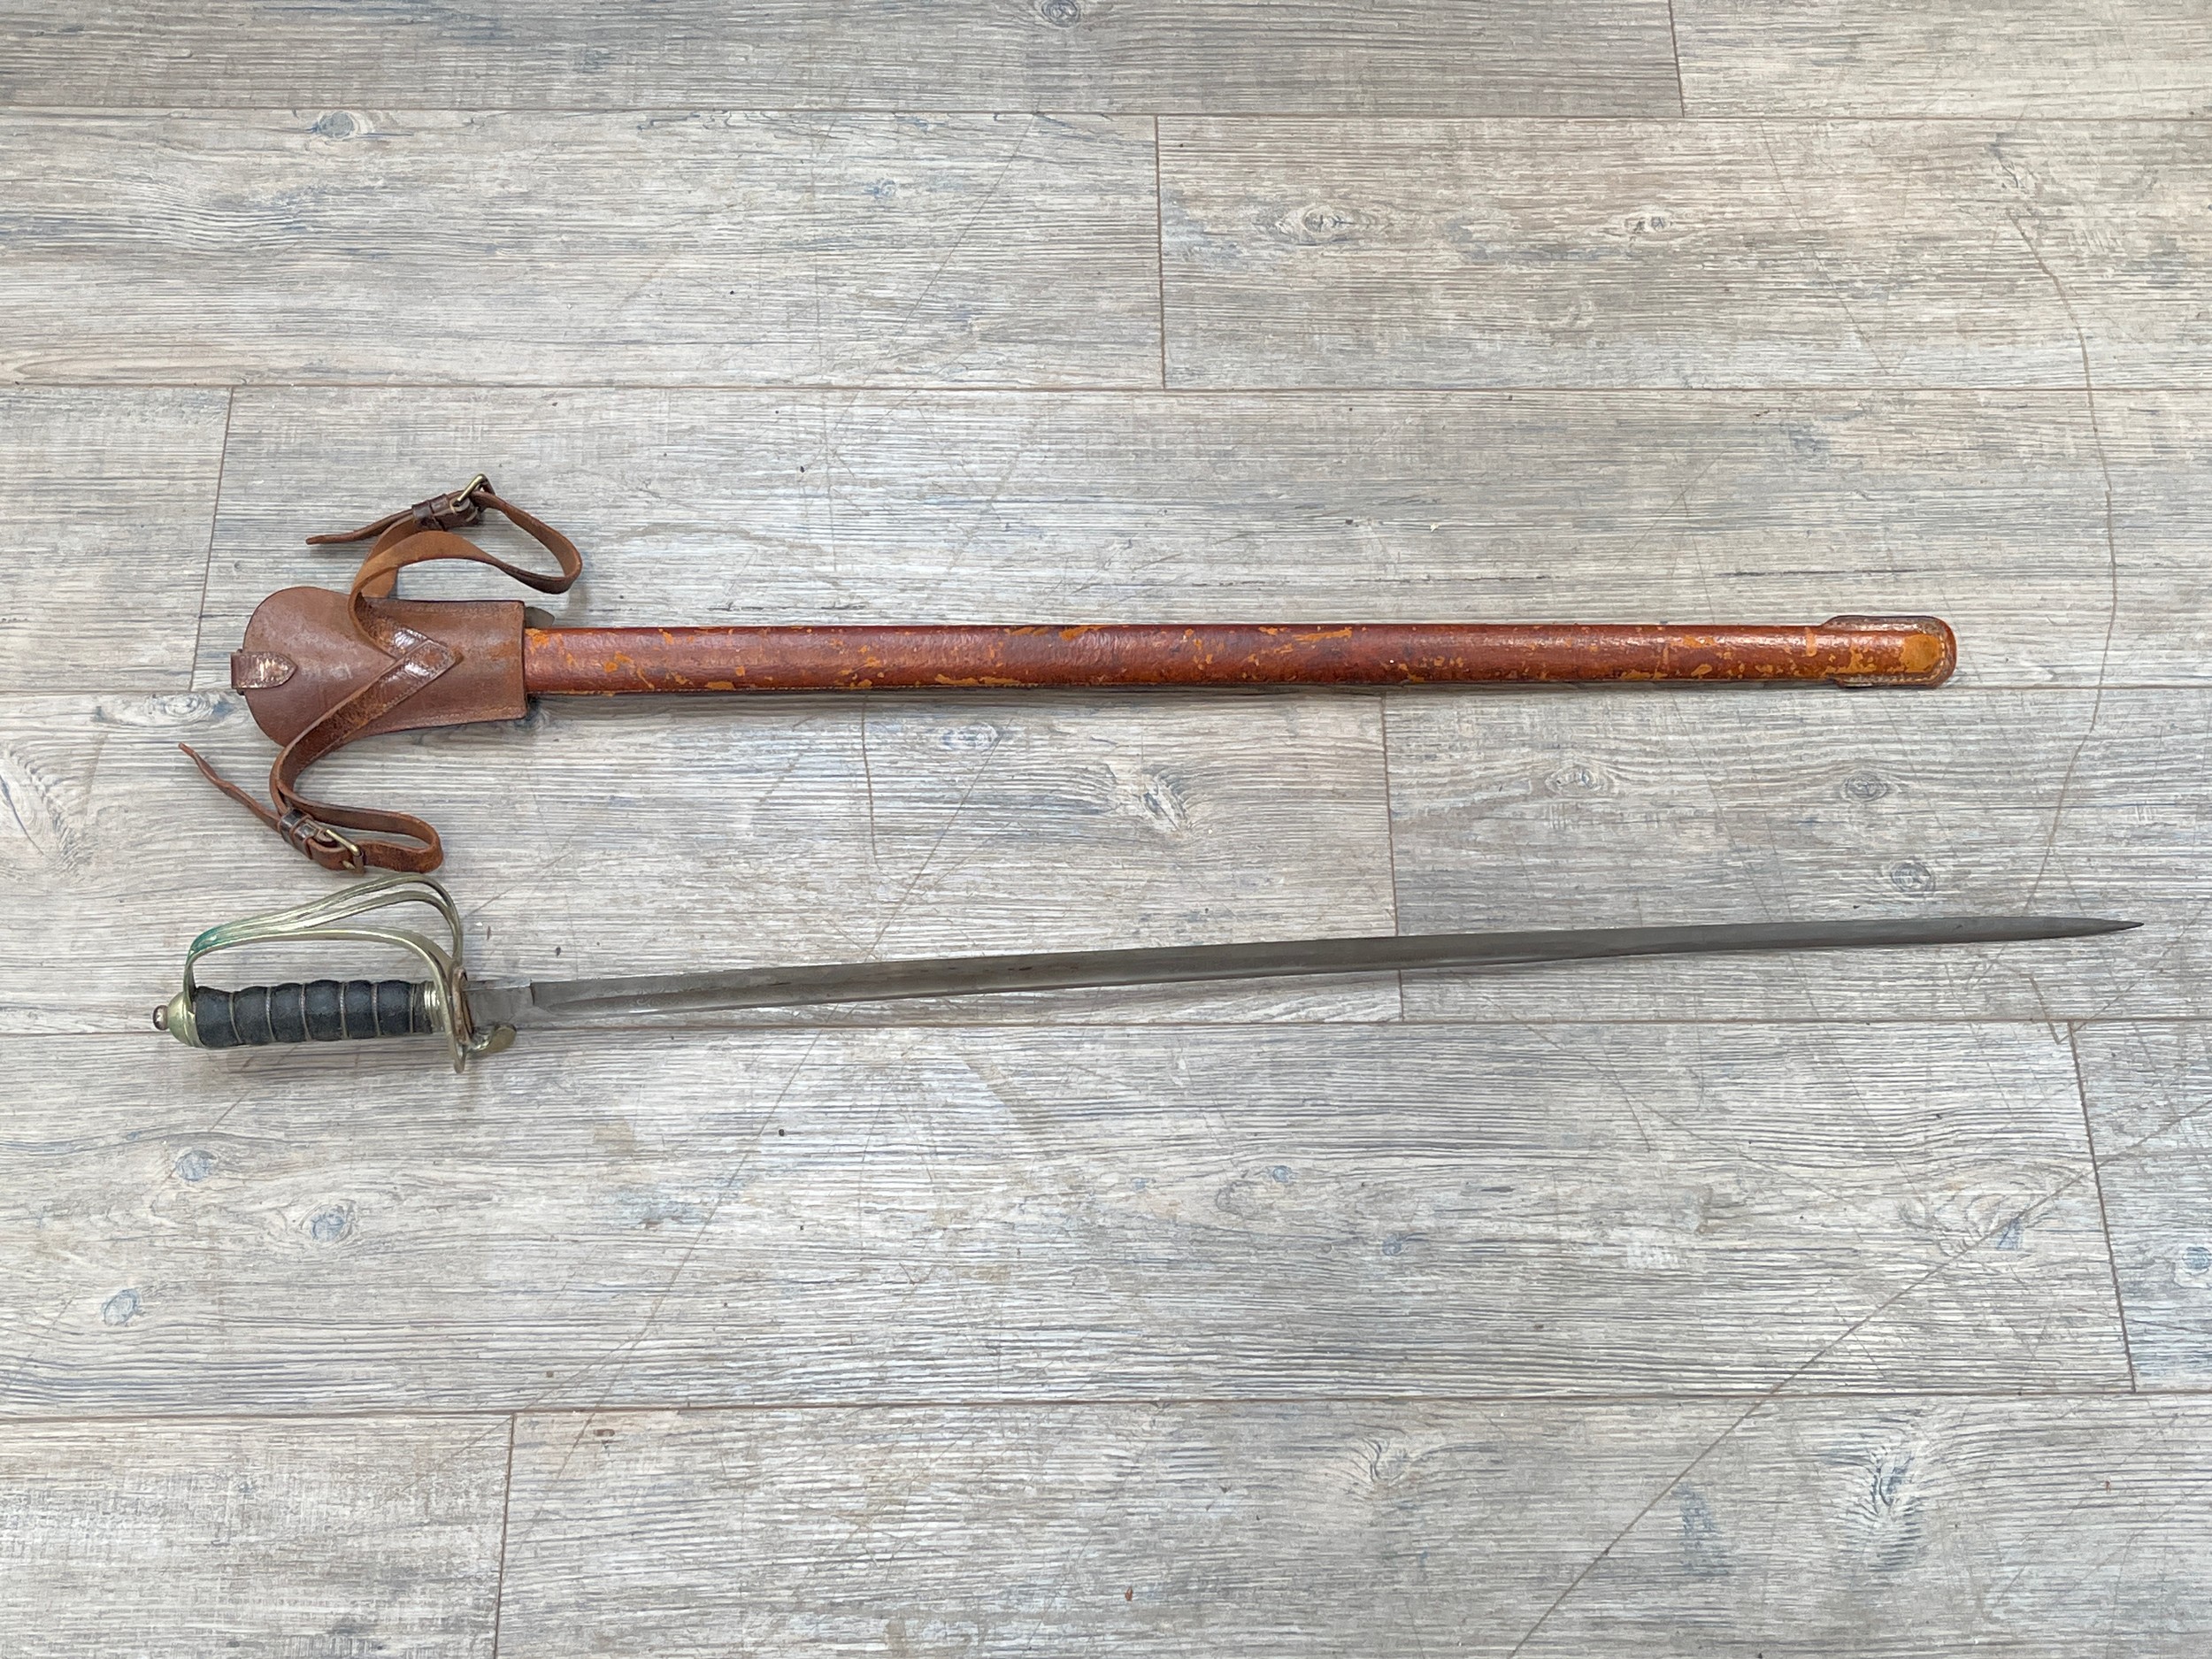 A George V 1821 pattern Royal Artillery officer's sword with leather field scabbard - Image 4 of 4